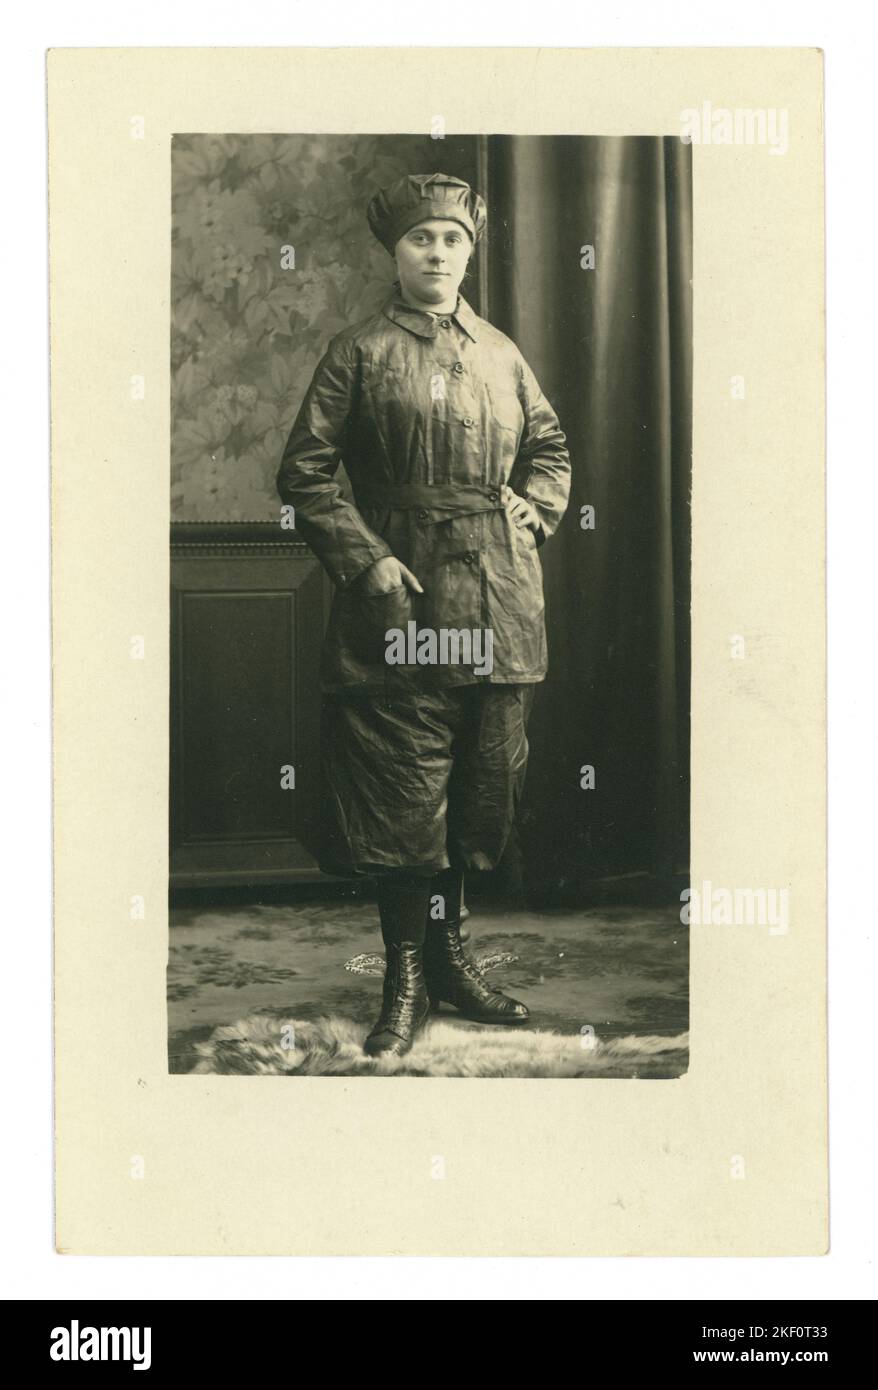 Original WW1 studio portrait postcard of German munitions worker (Alma Panza) On the reverse of the postcard is written 'In memory of the first moulder in Zeulenroda' - Zeulenroda, Triebes, Thuringia, Germany.  - War year (Kriegsjahr) 1916'. Stock Photo